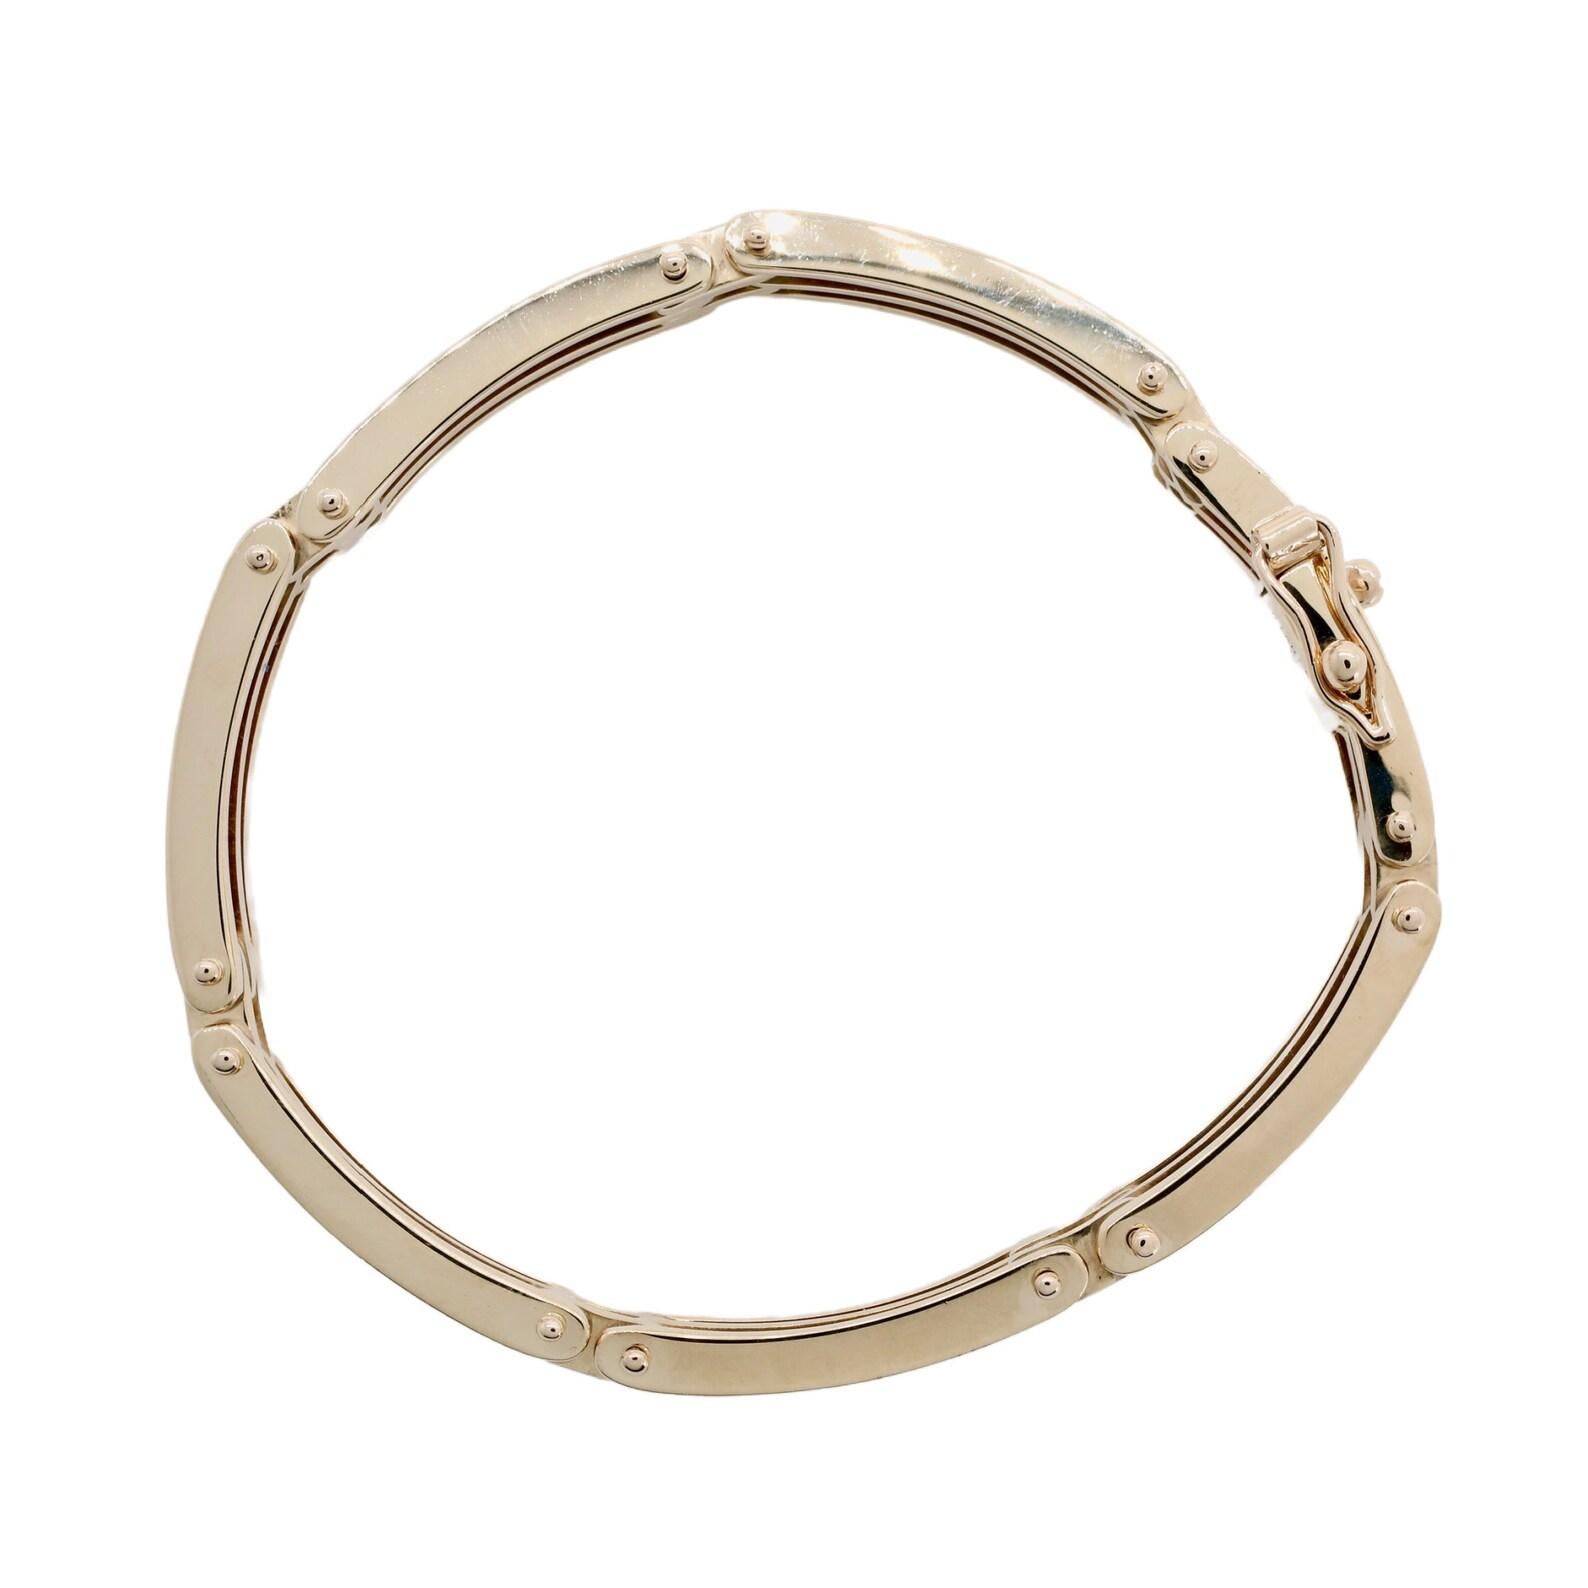 A machine age, late Art Deco Tiffany & Company mans, or unisex bracelet. Weighing a hefty 52 grams, this bracelet is handmade and solid. The bracelet consists of elongated curved links in groups of three, connected by pairs of shorter links.